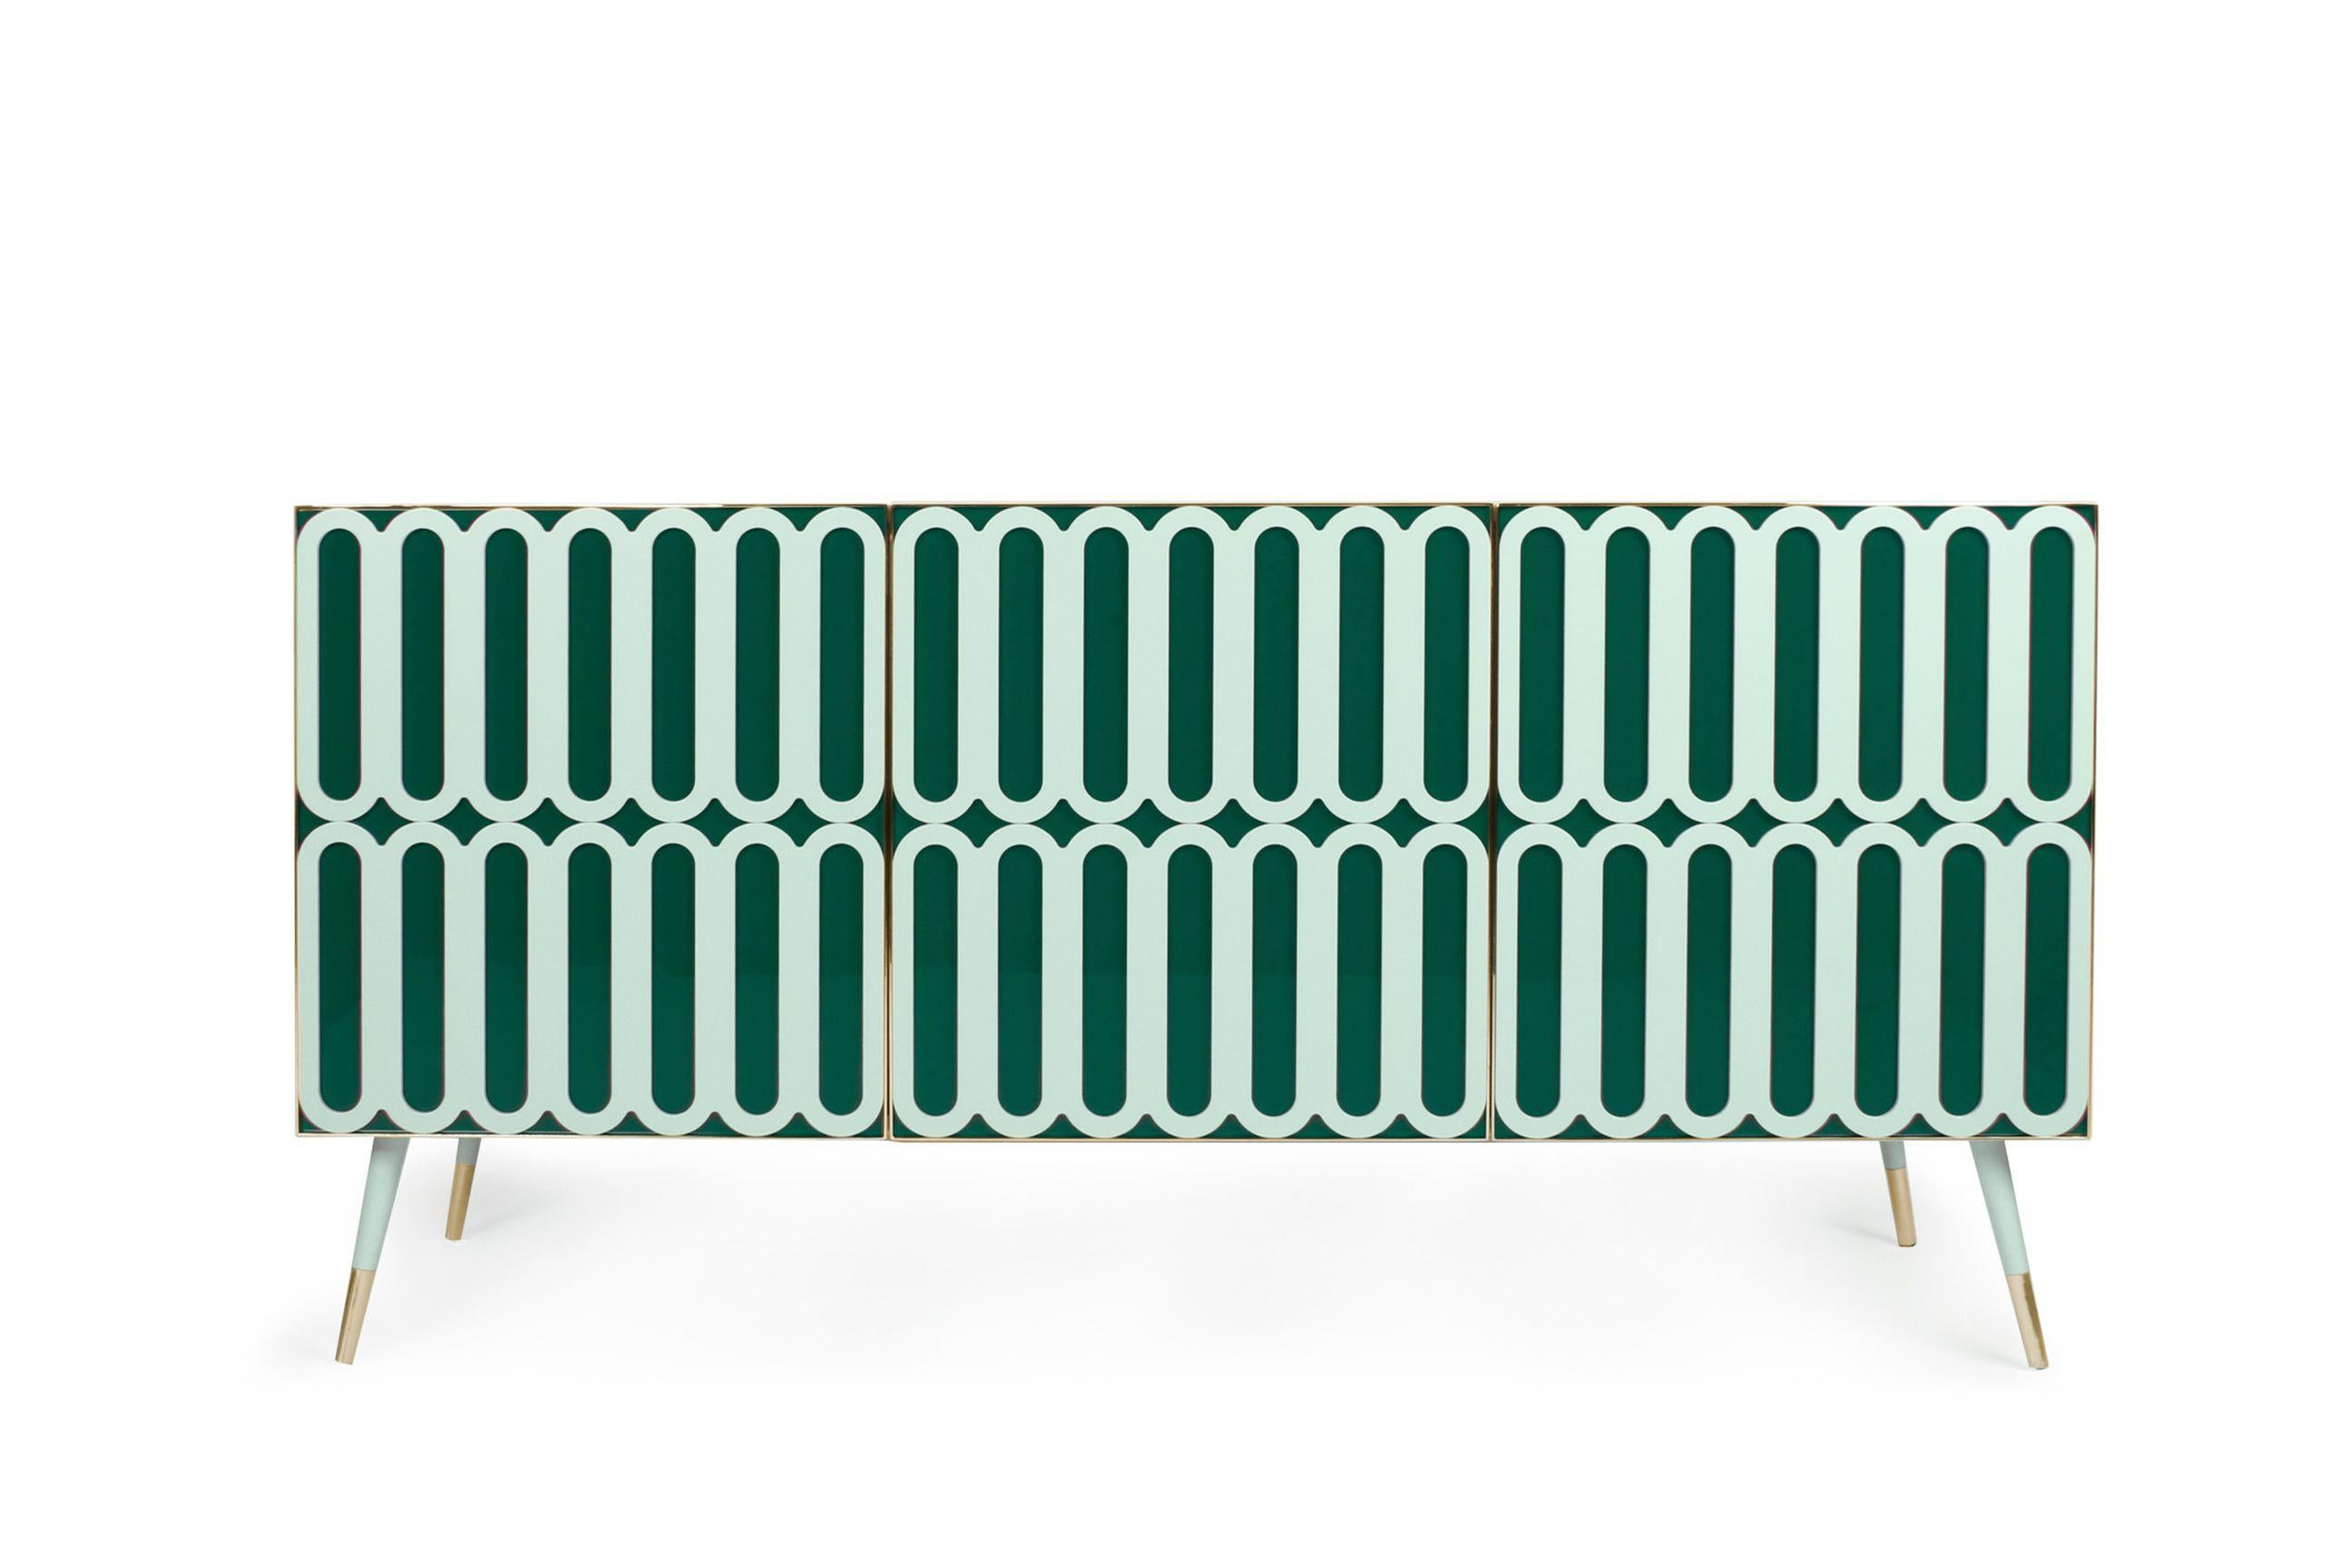 Marshmallow sideboard by Royal Stranger
Dimensions: 188 x 49 x 91 cm
Materials: A matte body and a matte pattern over a glossy surface, elevated by a brass presence.


The Marshmallow sideboard is inspired by the glorious Art Deco decade, the